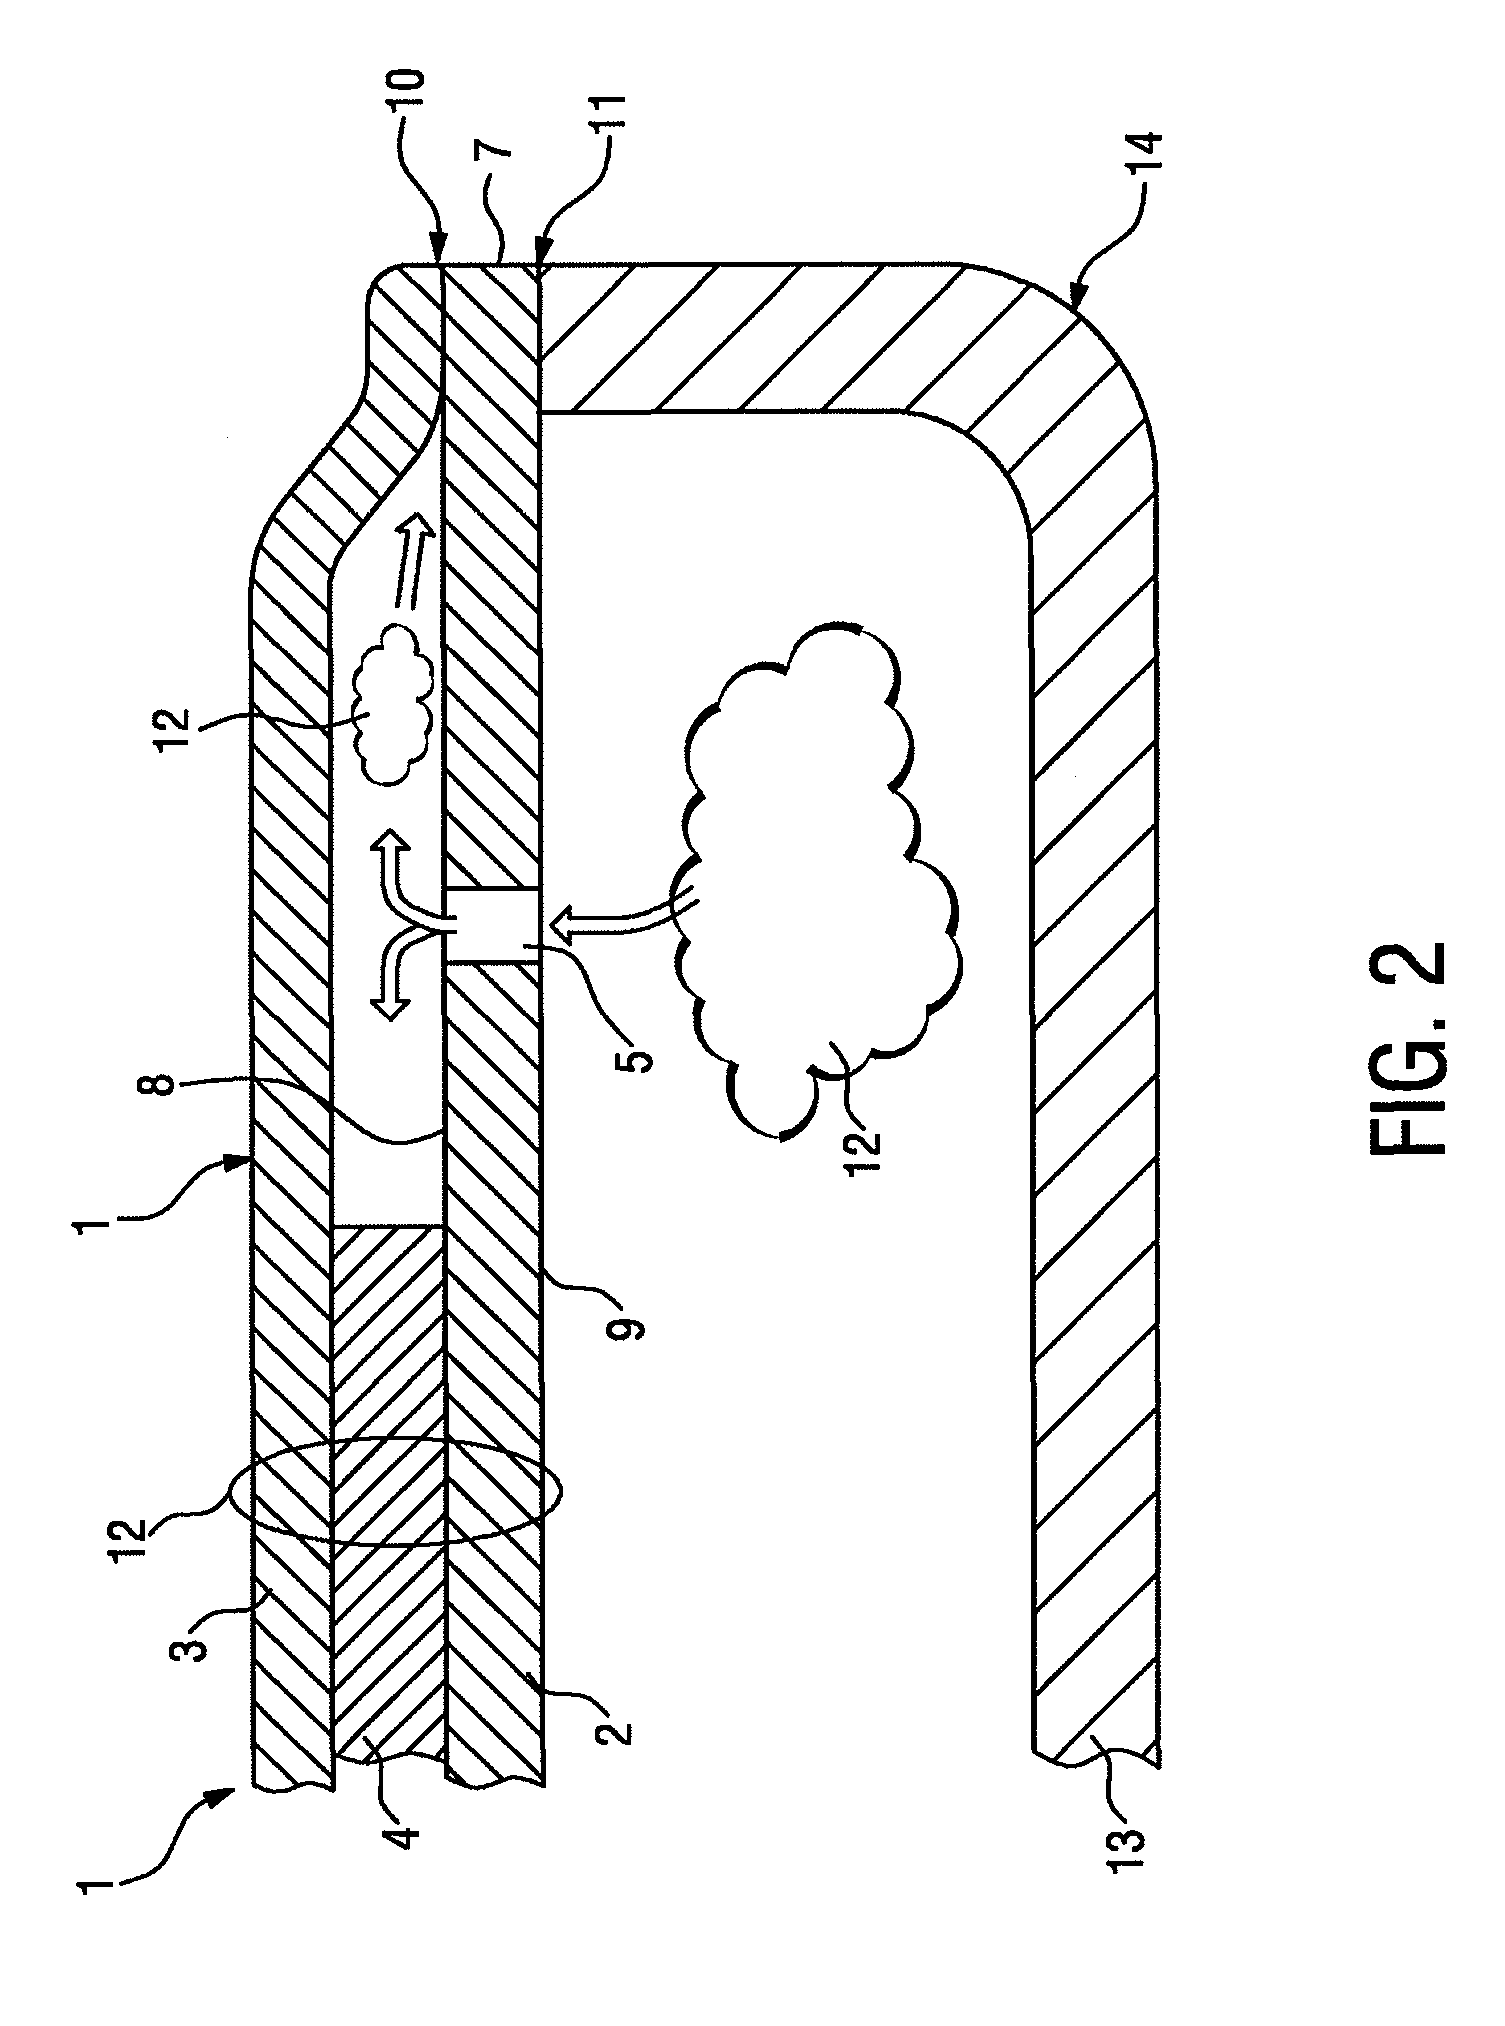 Foil for providing a peel-seal valve, package comprising the foil, and method of manufacturing the foil